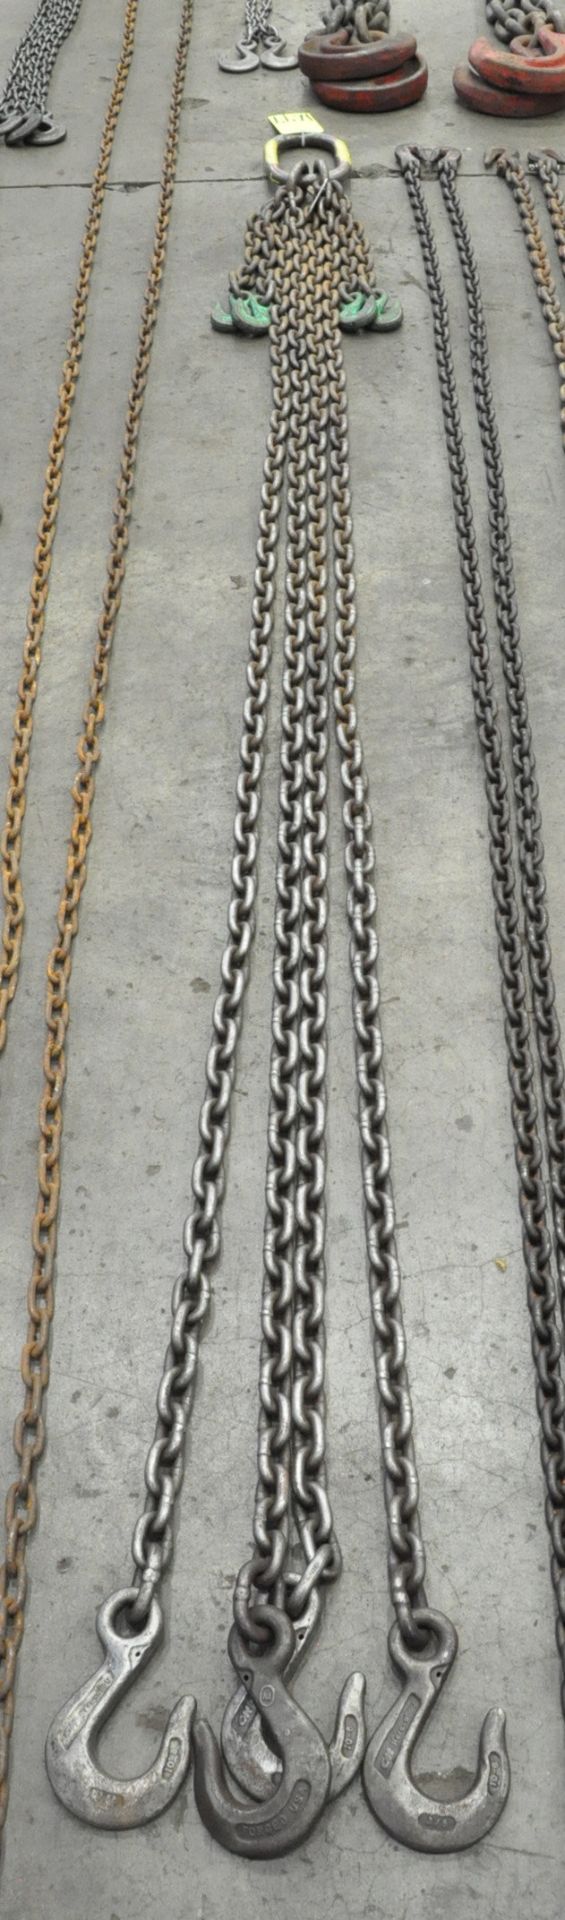 3/8" Link x 9' Long 4-Hook Chain Sling with (4) Chokers, Cert Tag, (G-24), (Yellow Tag) - Image 2 of 2